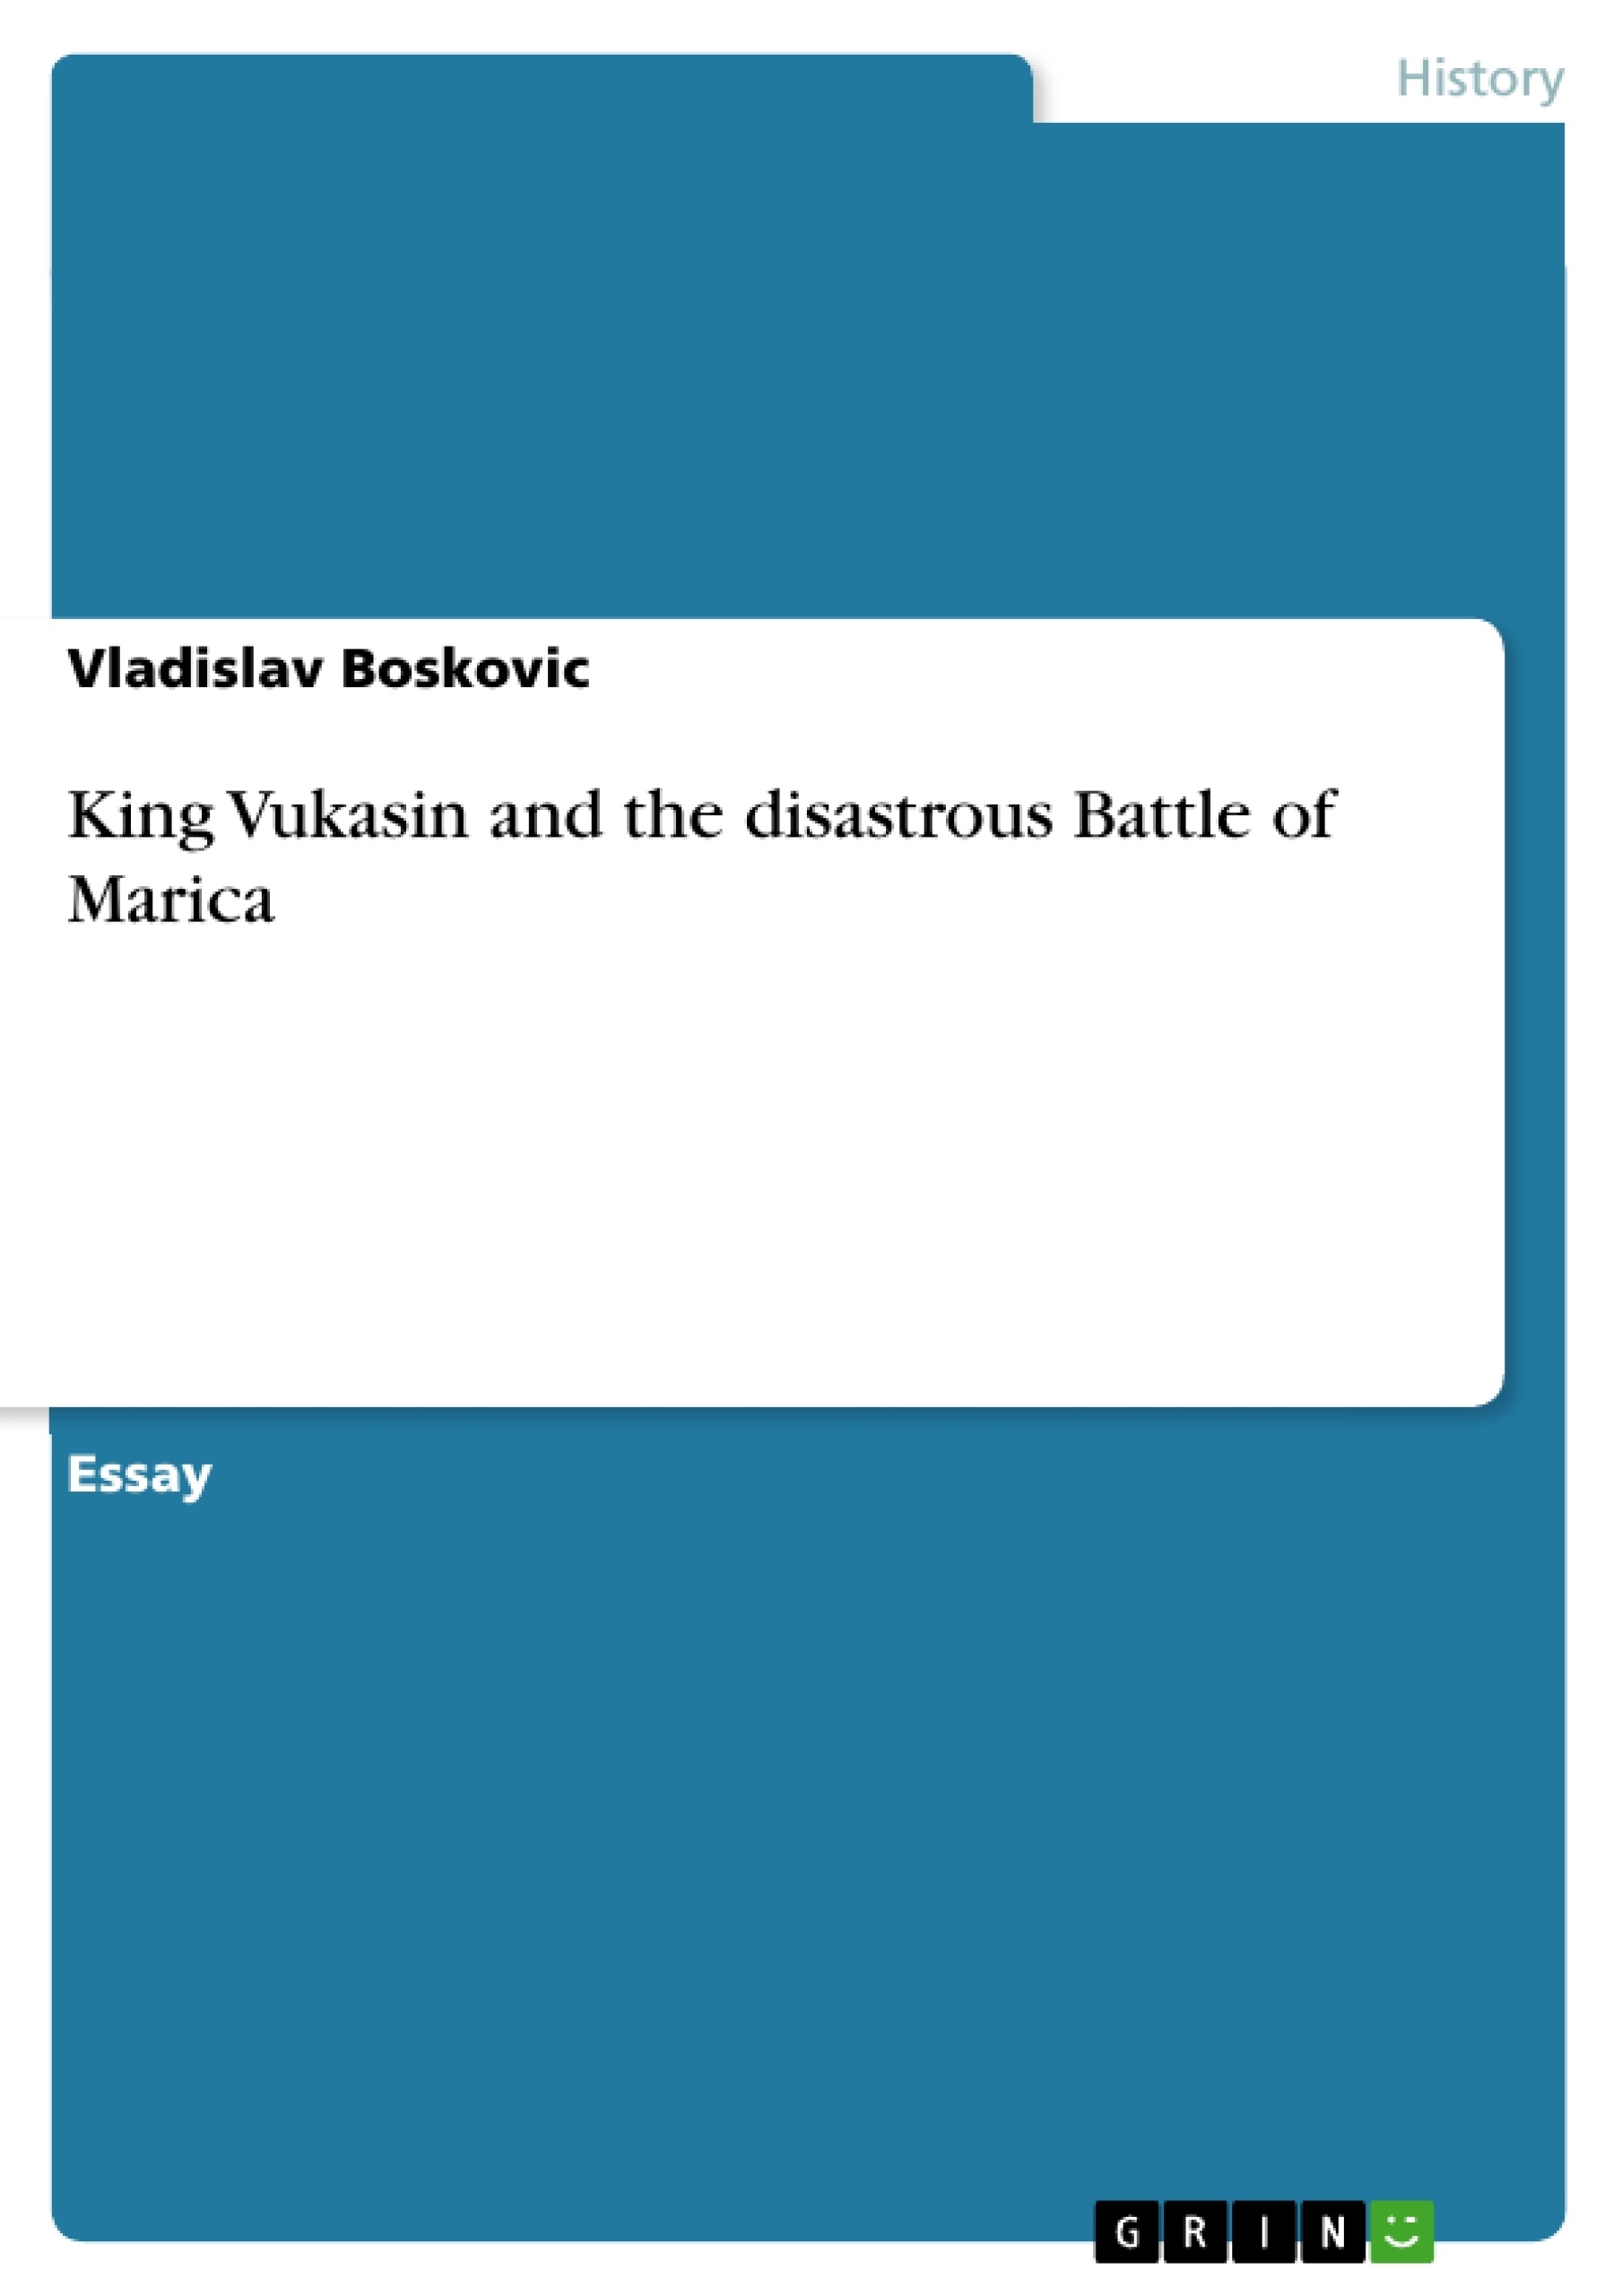 Titre: King Vukasin and the disastrous Battle of Marica